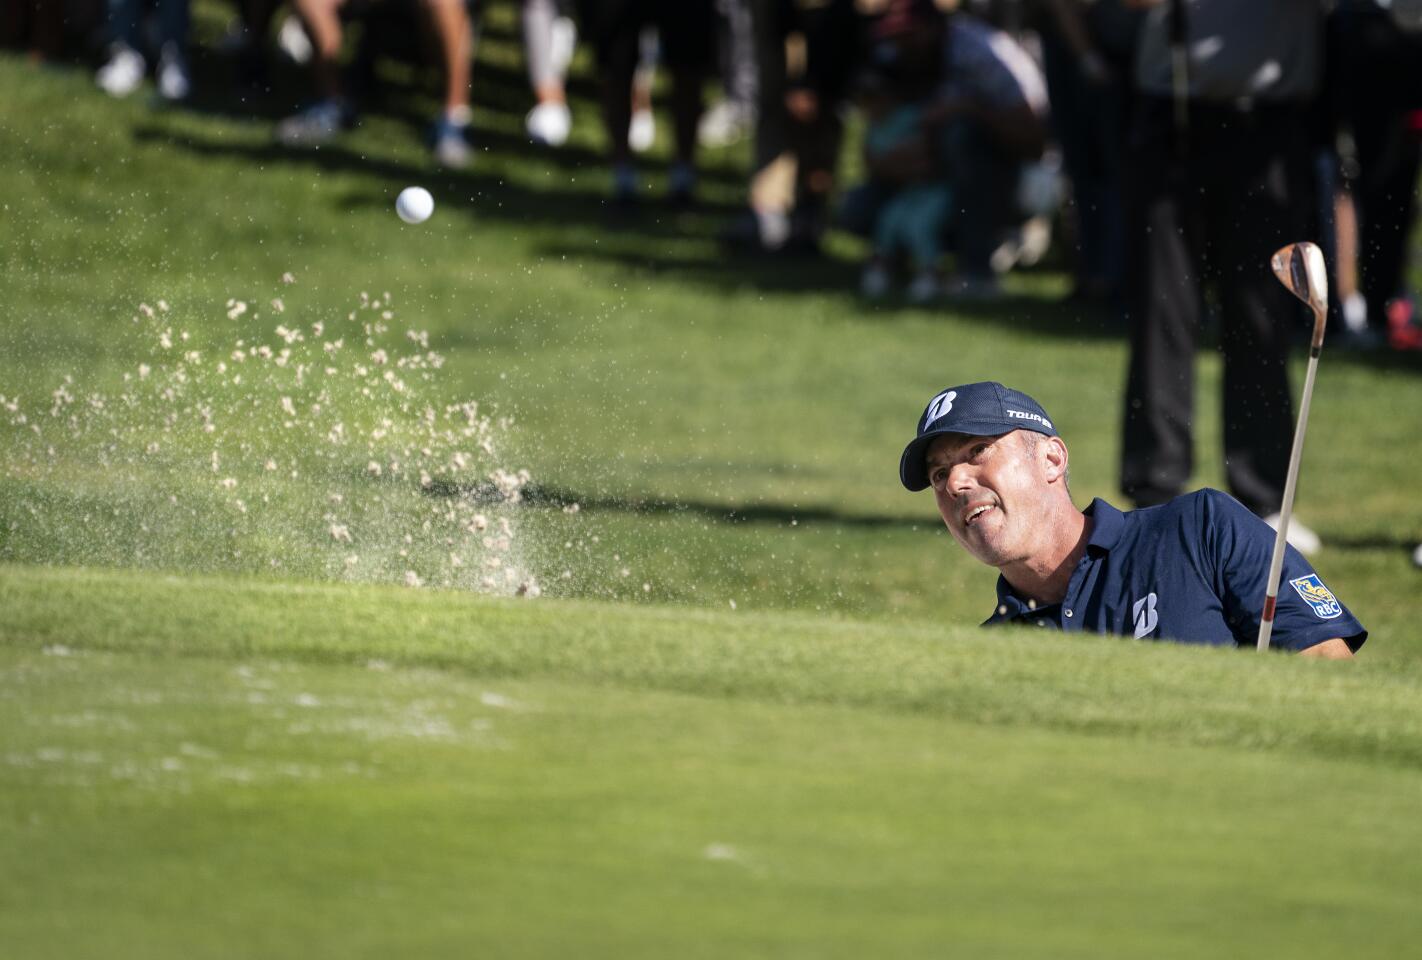 Matt Kuchar hits out of the sand trap on the 14th hole during the third round of the Genesis Invitational at Riviera Country Club on Feb. 15, 2020.